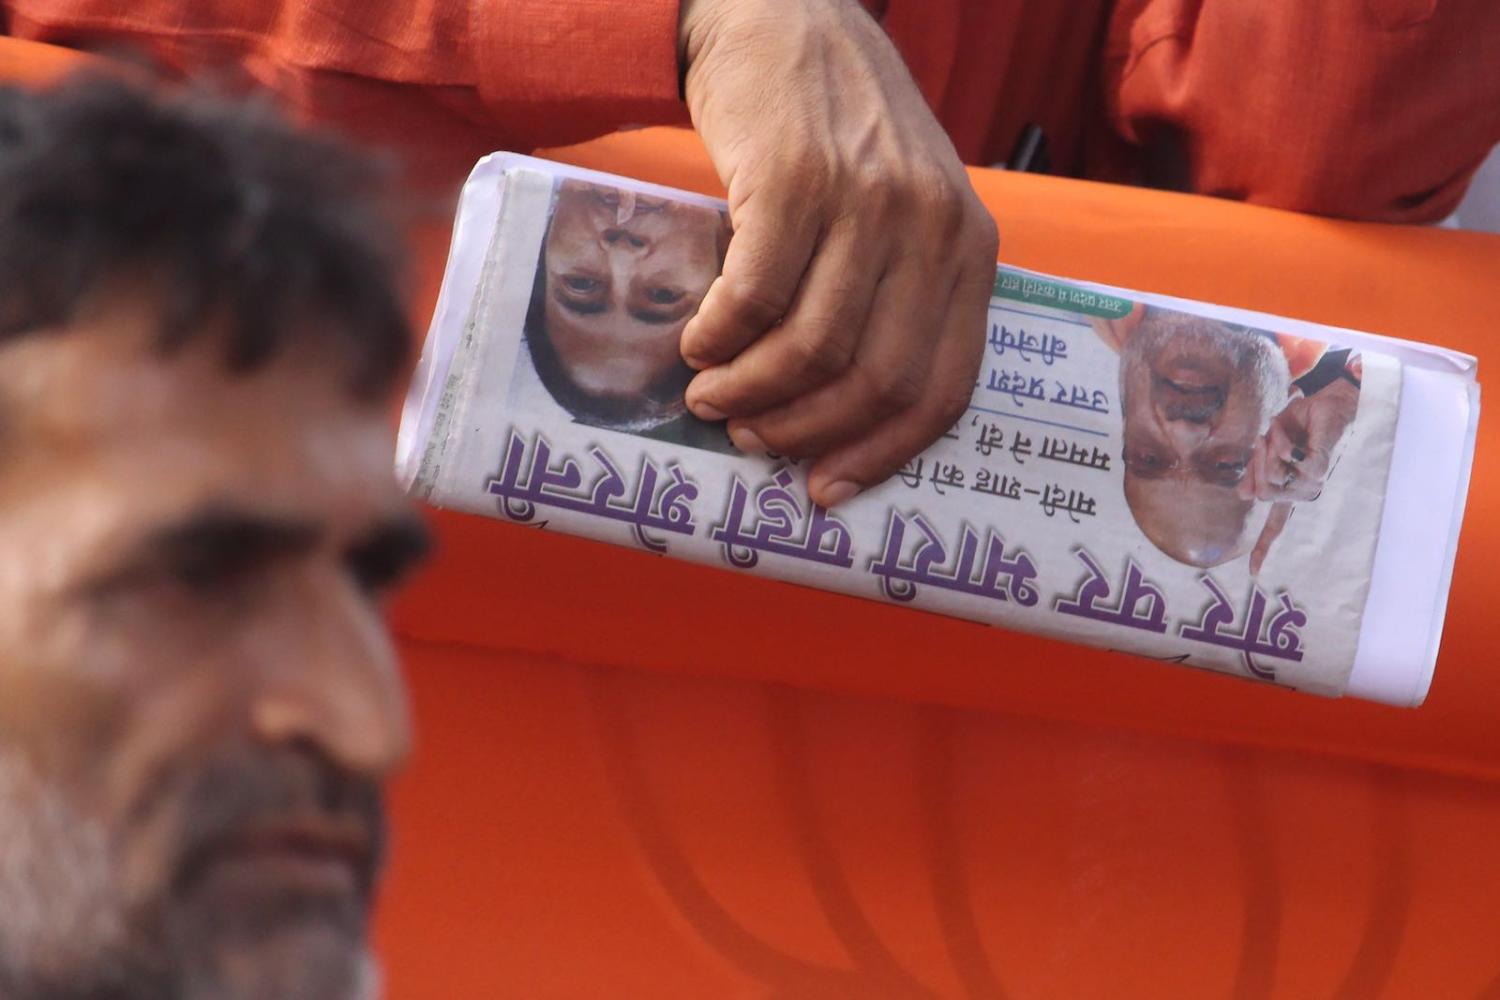 There are more than 100,000 registered newspapers and magazines across India, only many now pick a “side” (Photo: Himanshu Bhatt via Getty)